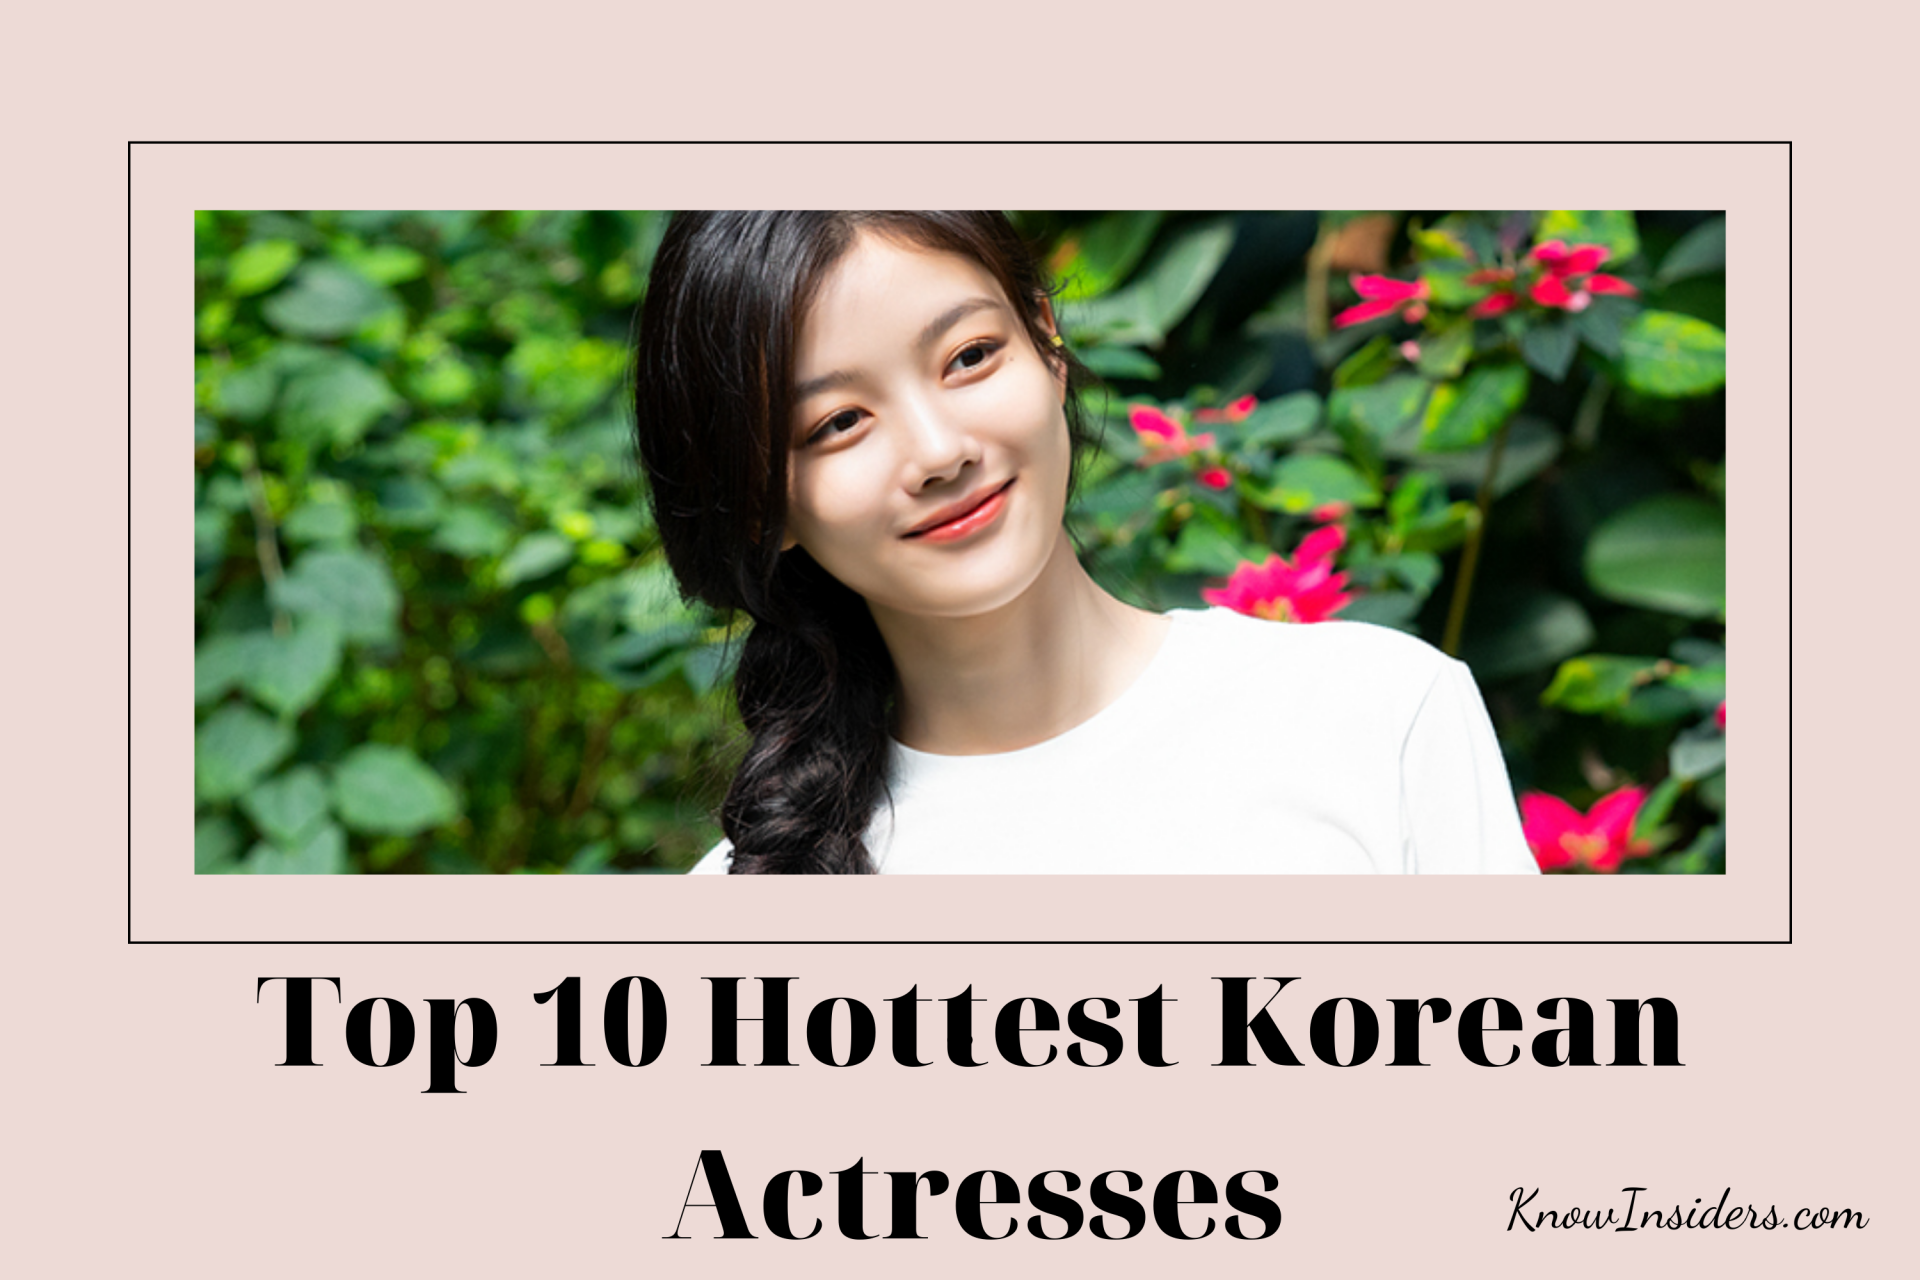 Top 10 Most Beautiful and Hottest Korean Actresses